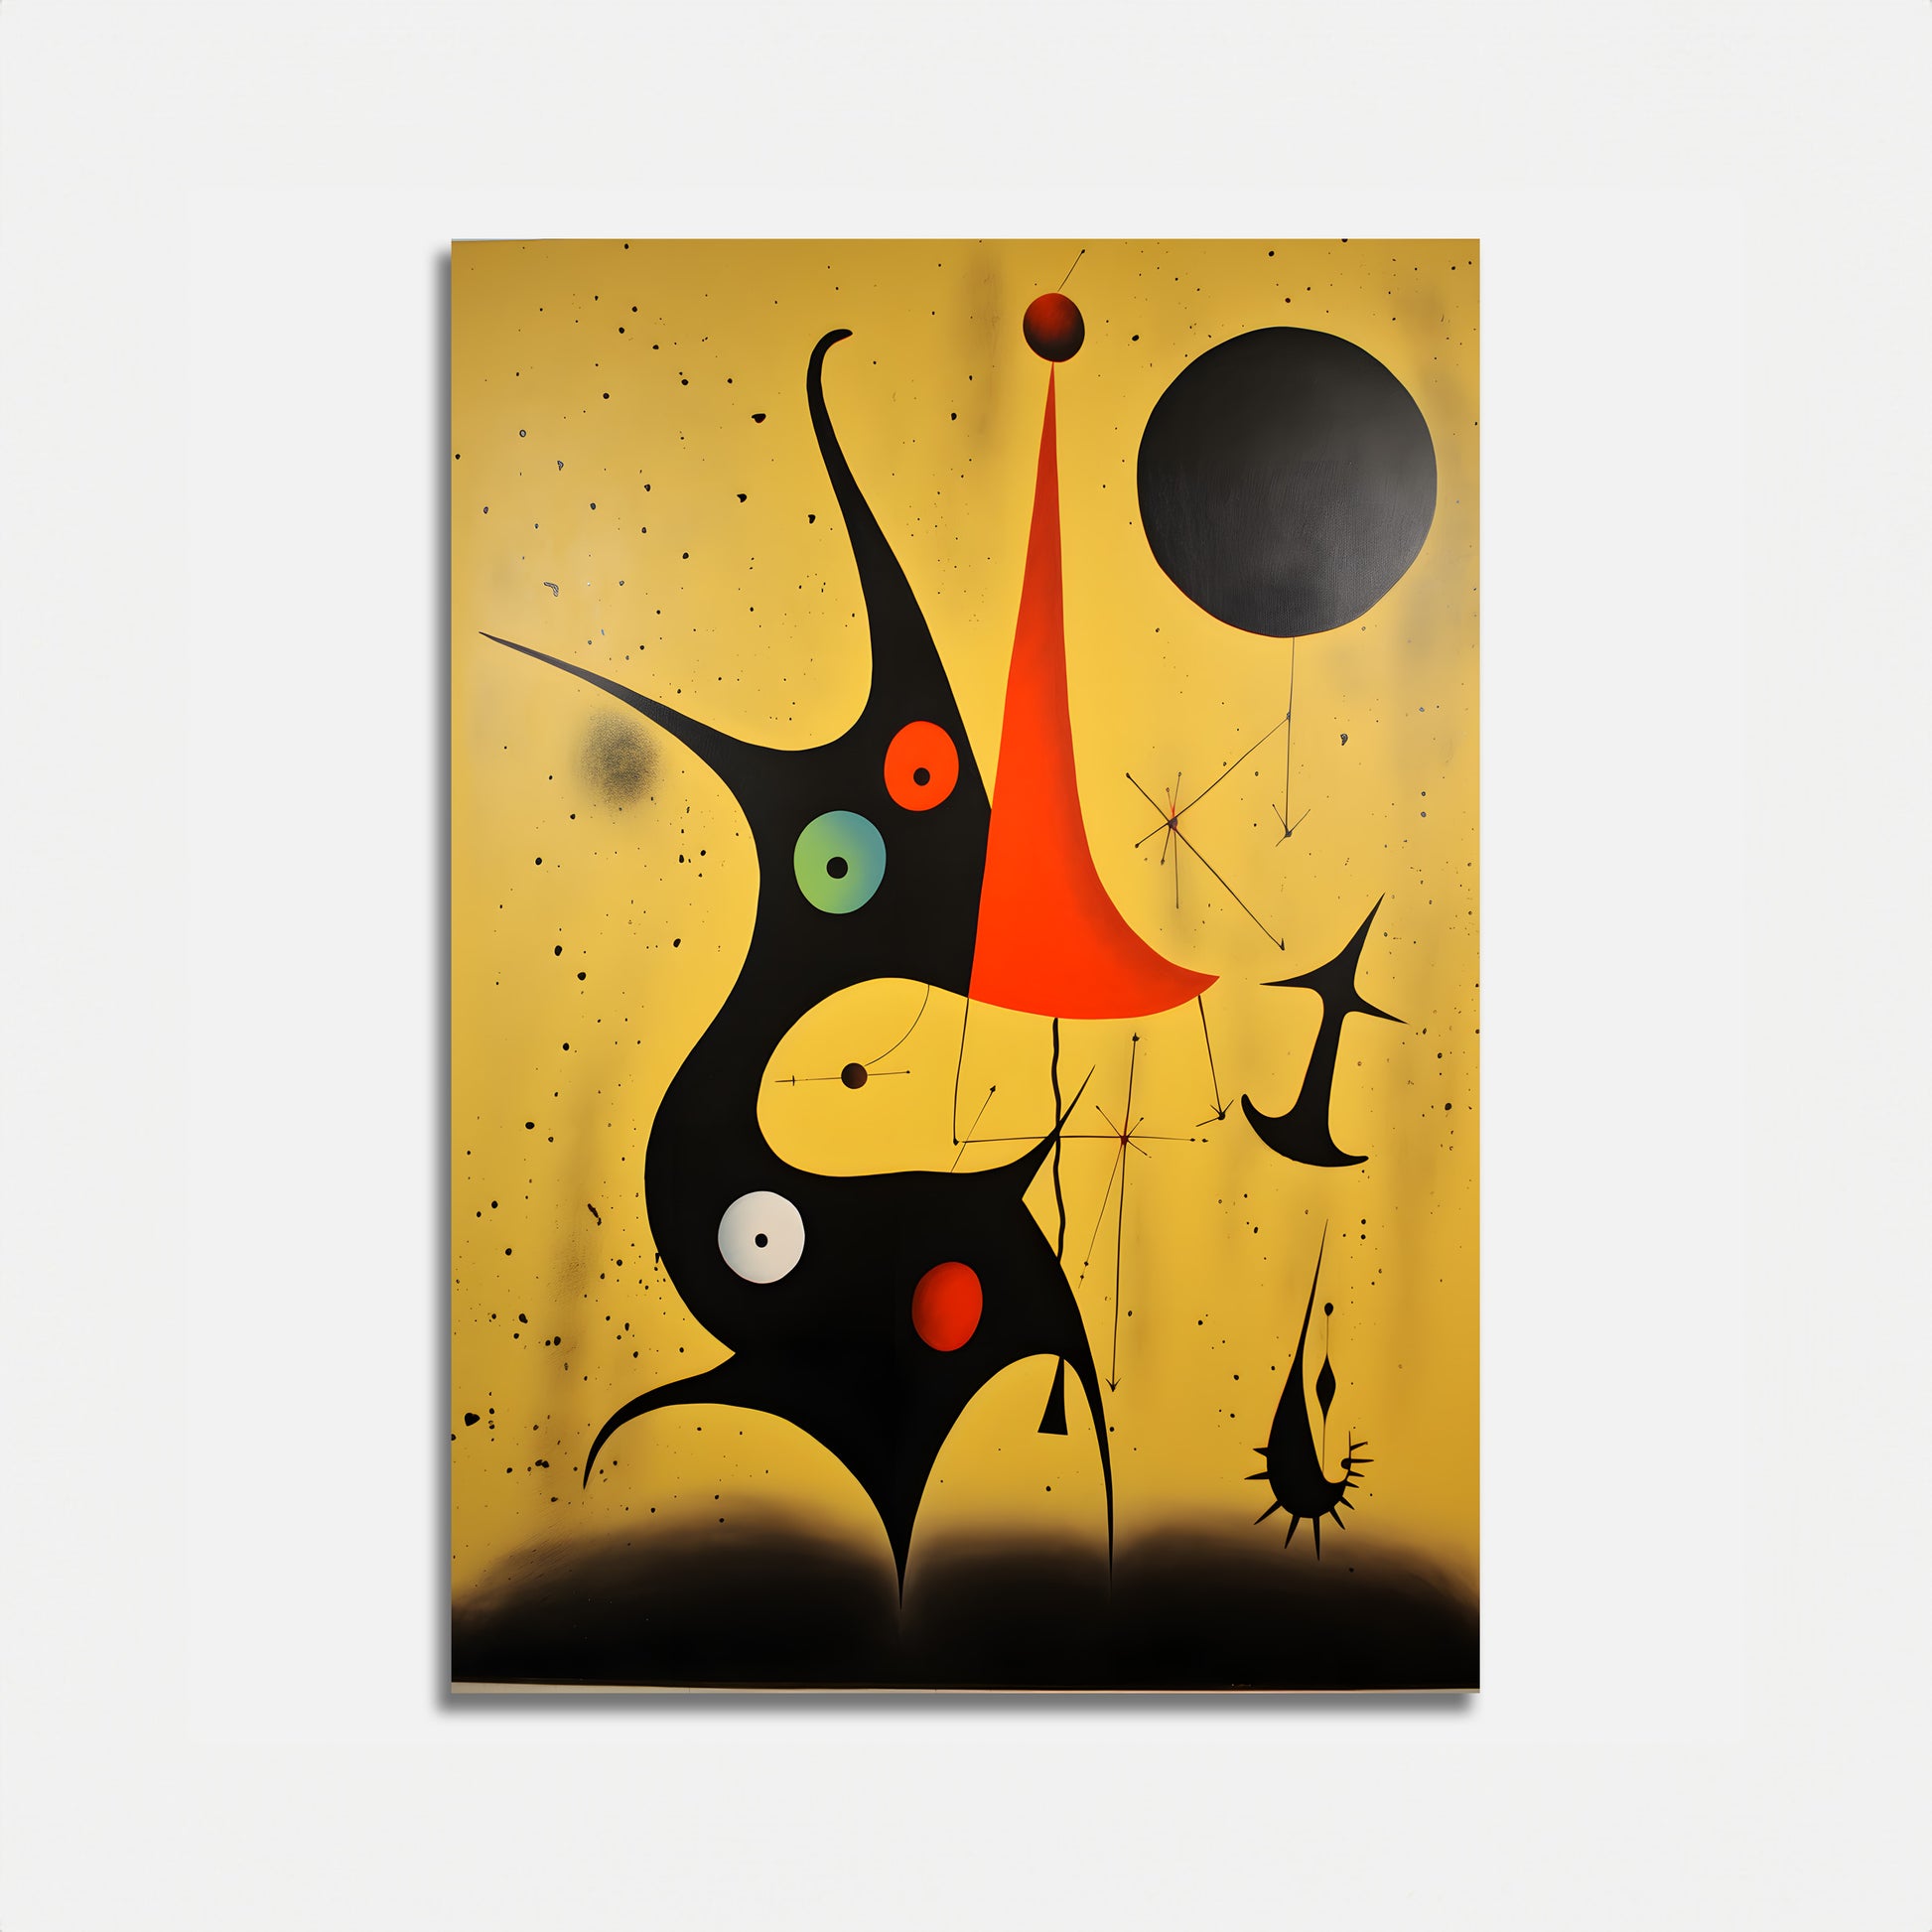 Abstract painting with whimsical shapes and spots on a yellow background.